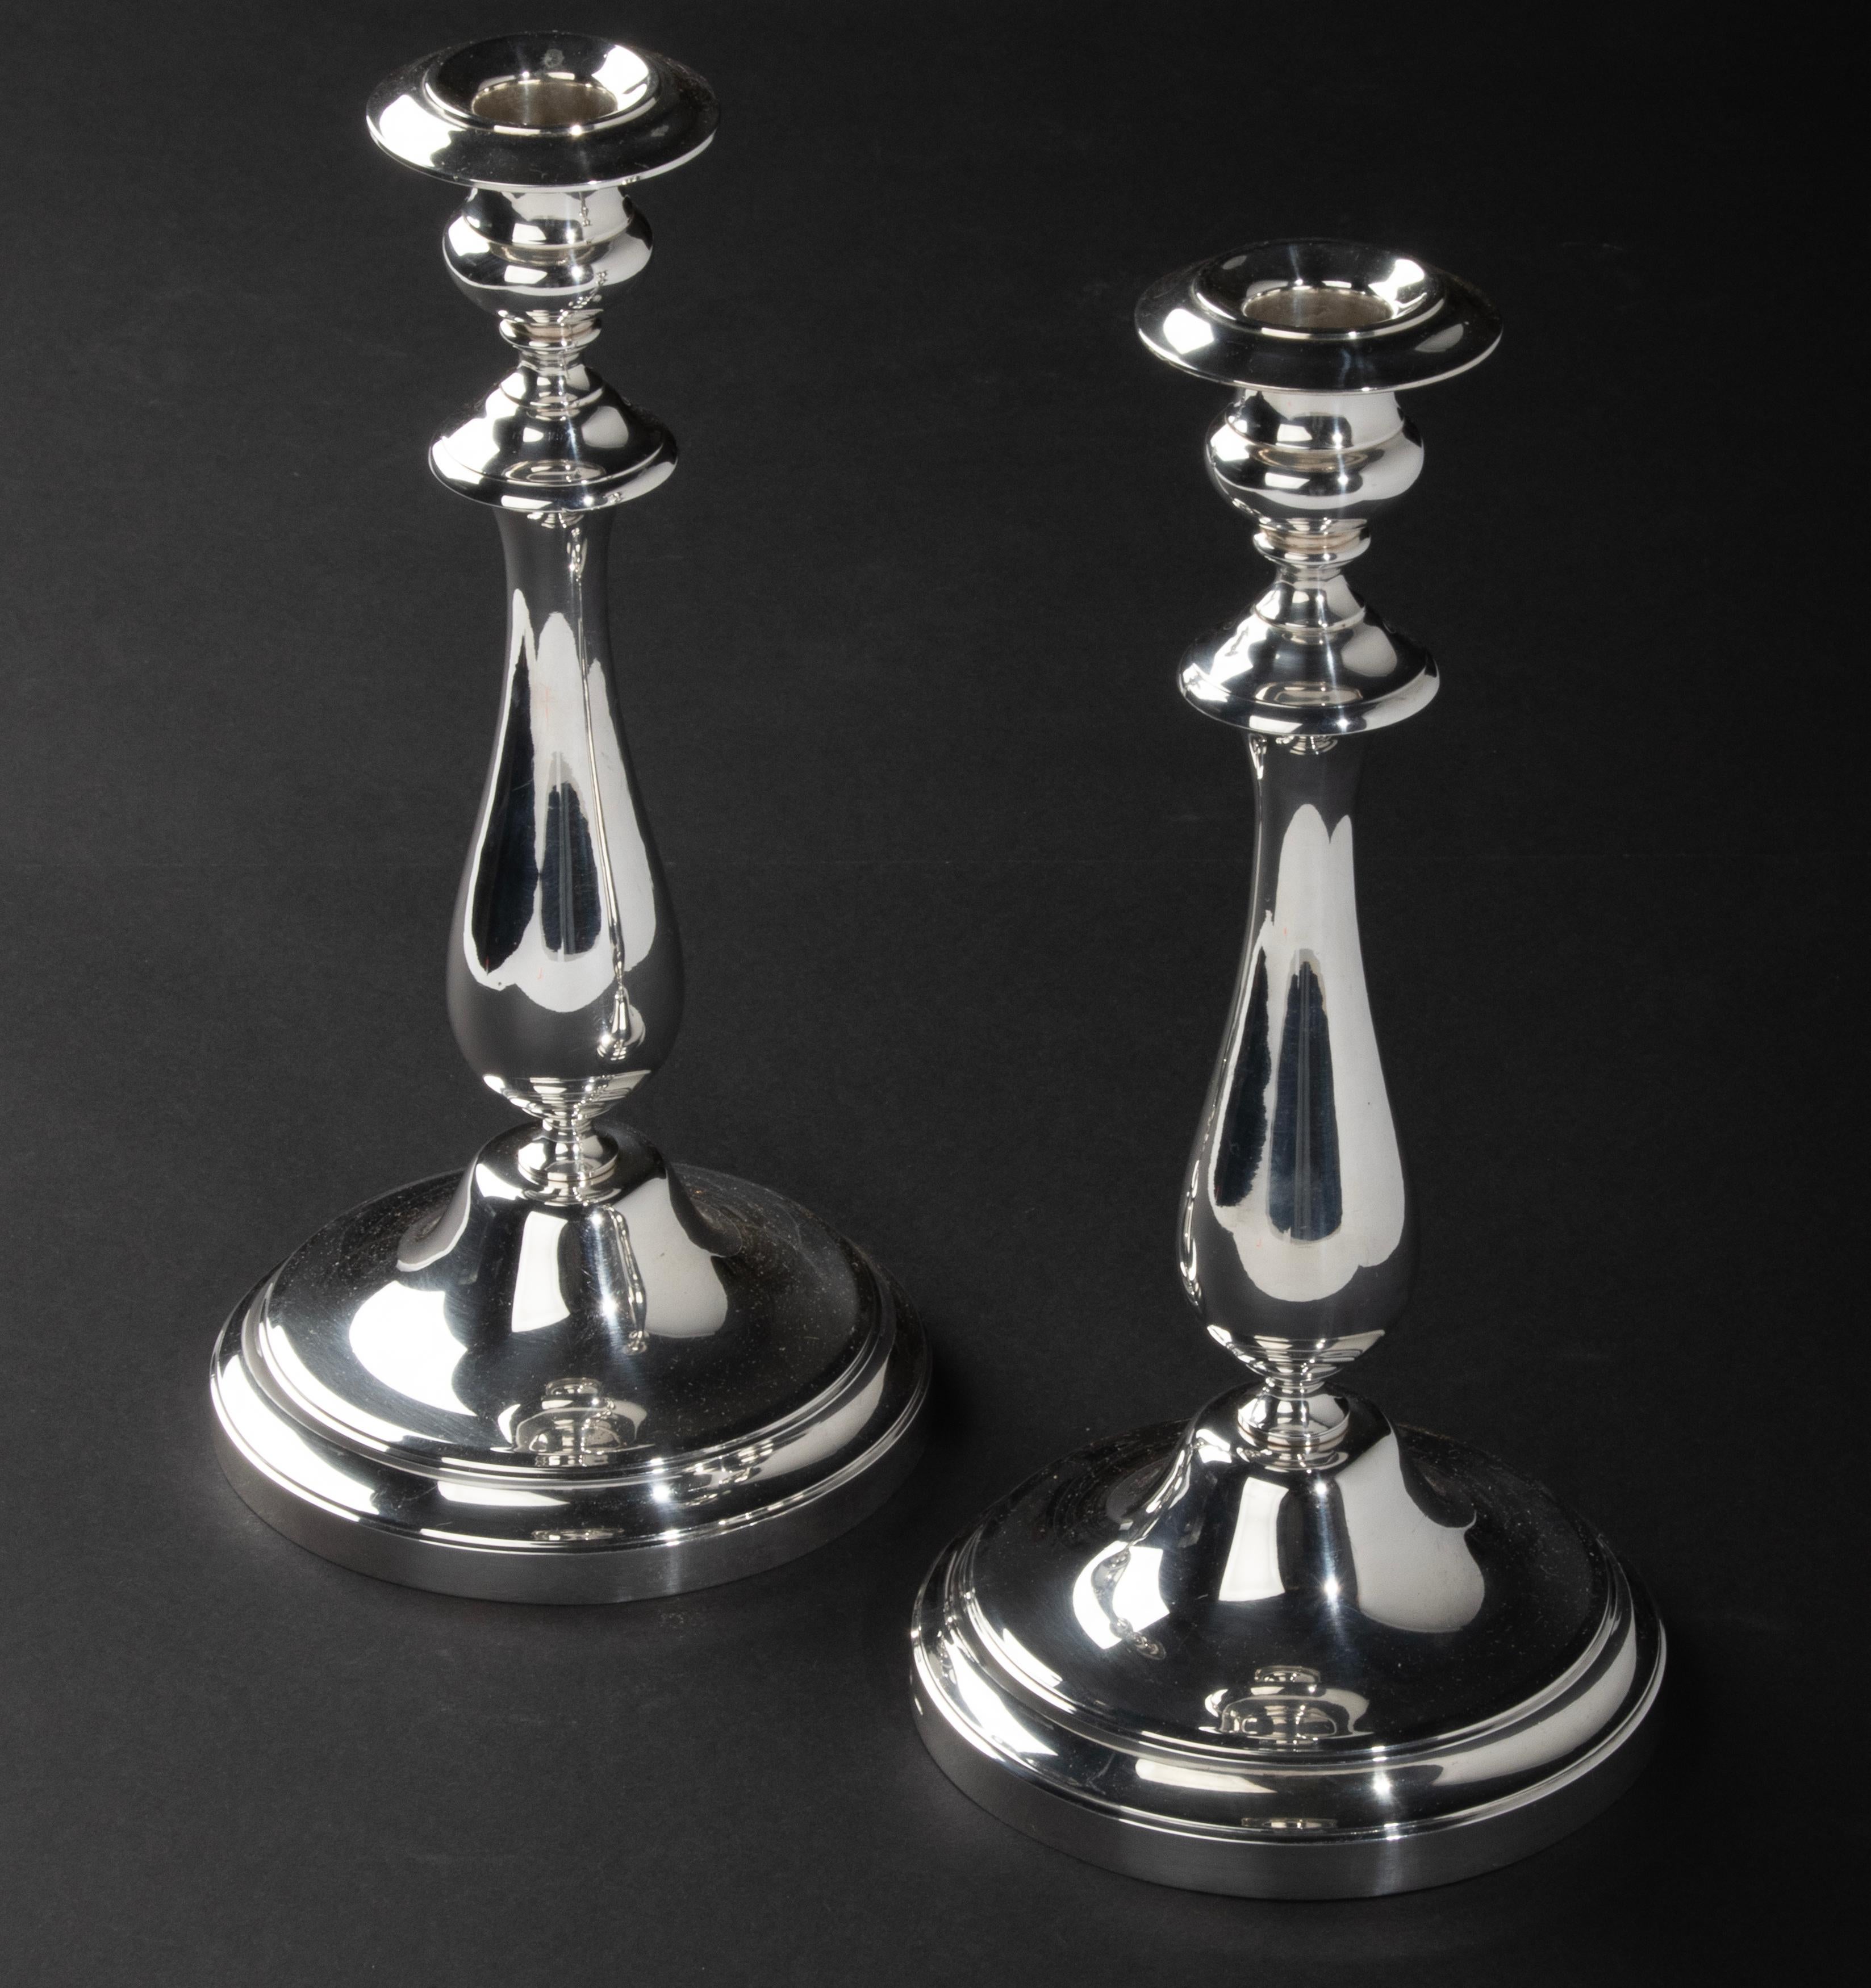 A Pair of Modern Classic Silver Plated Candlesticks made by Christofle France 7